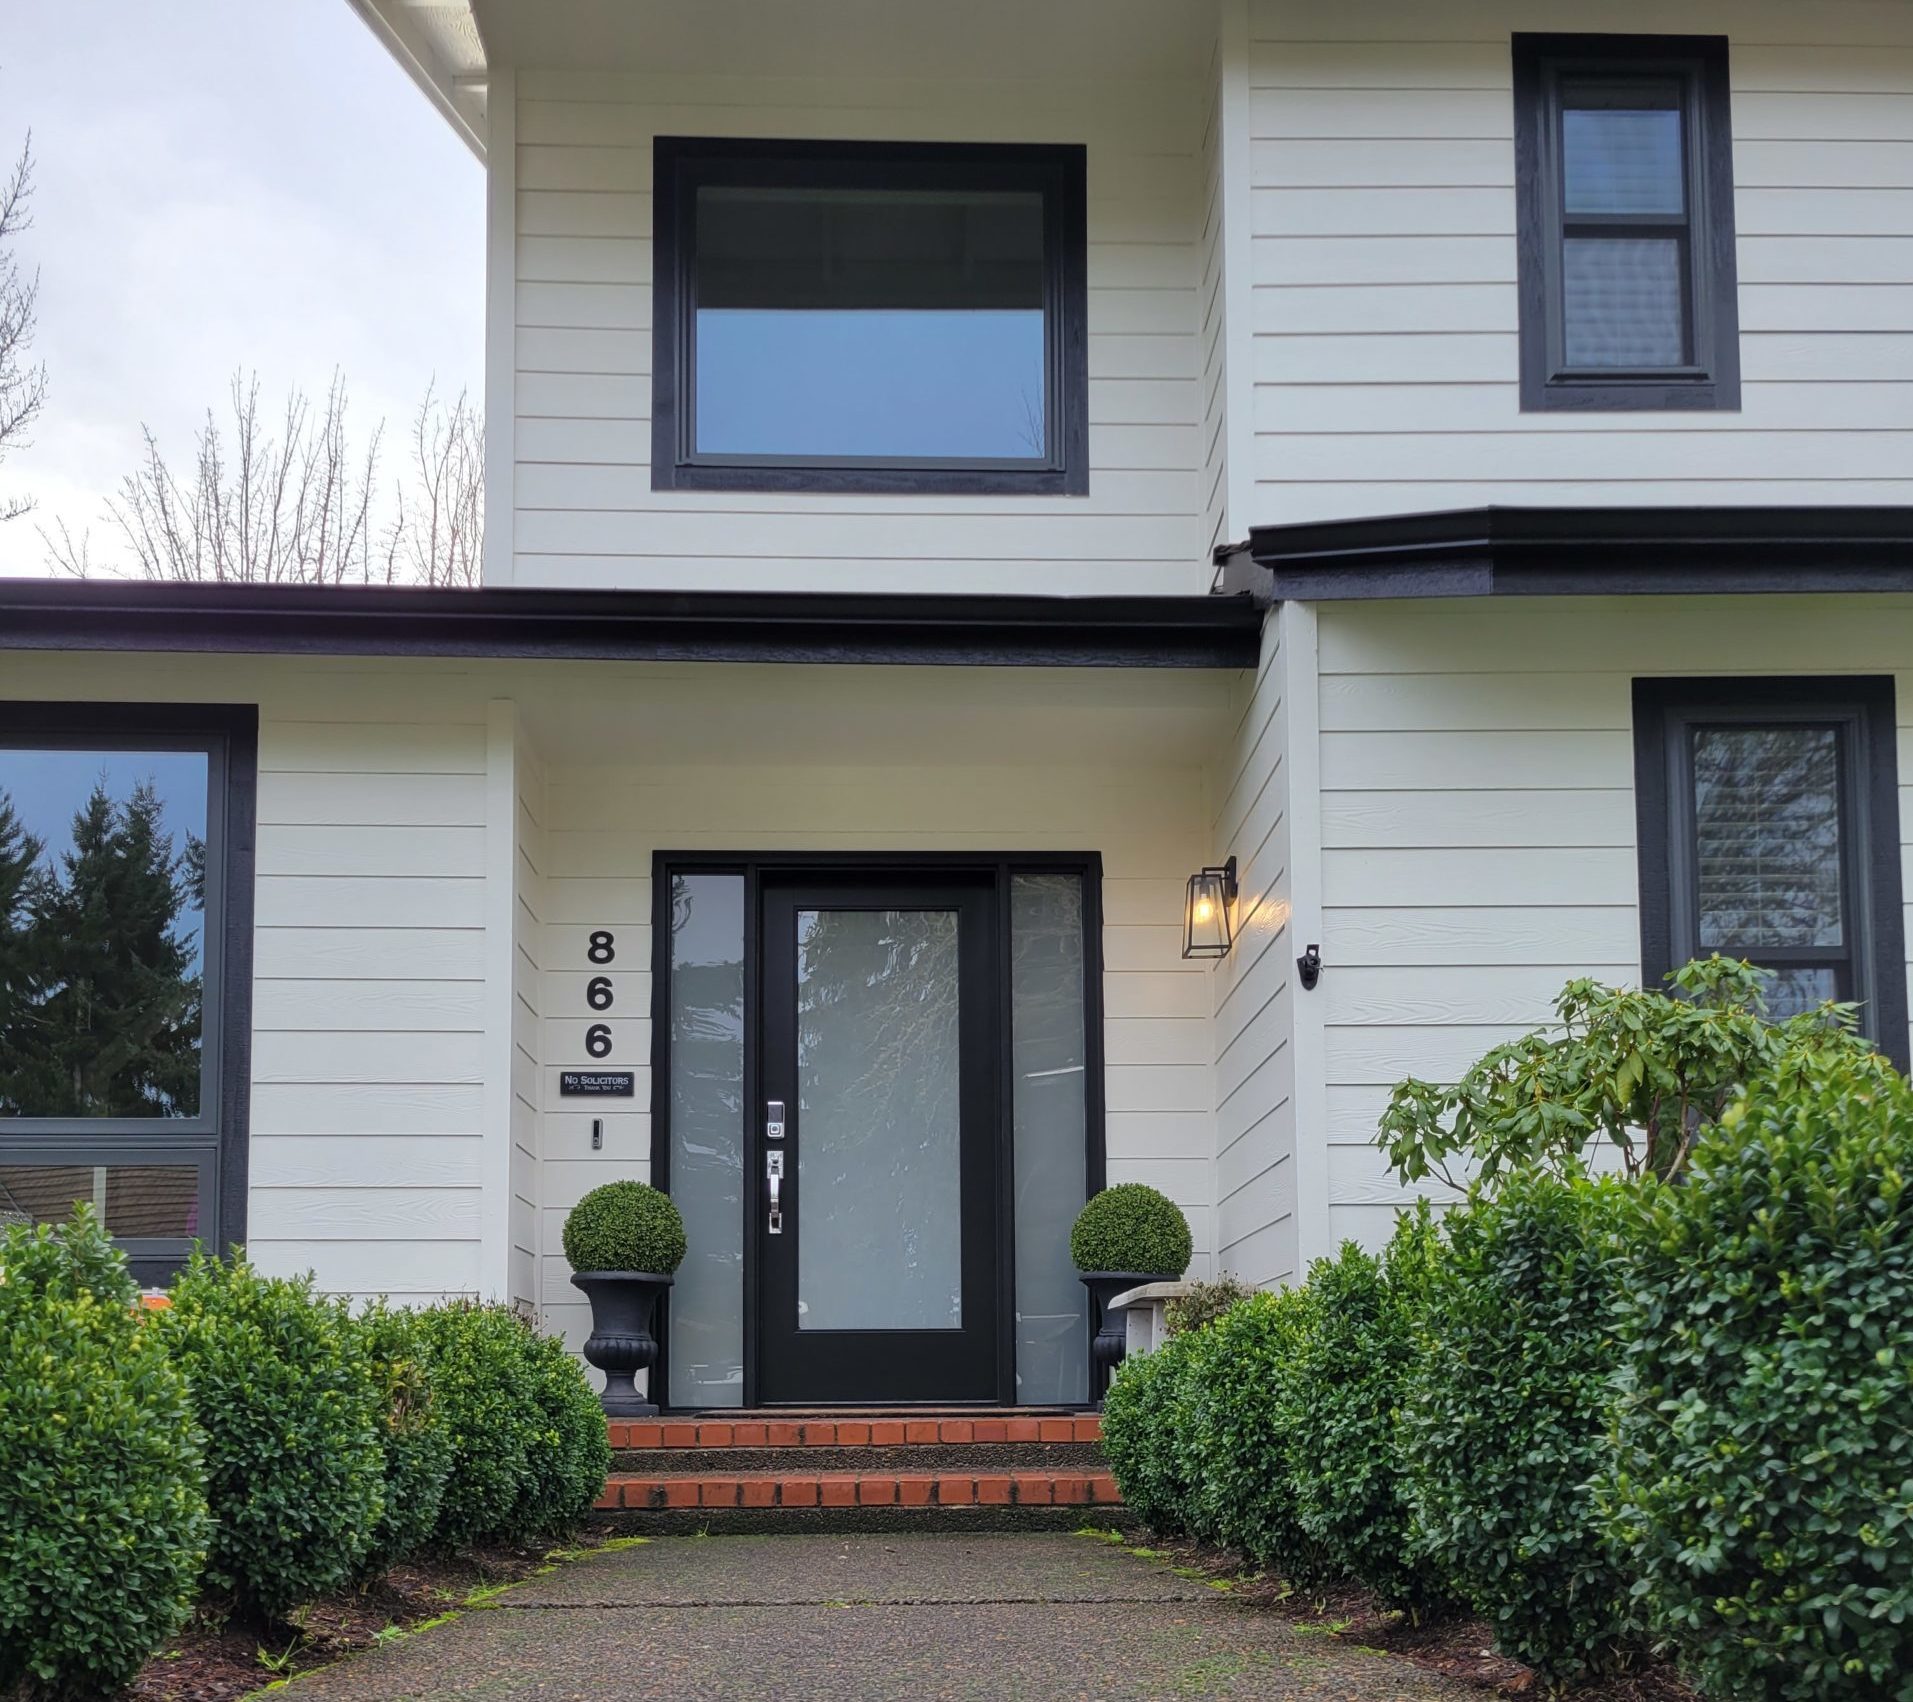 Clean and kept home with modern black windows and doors.